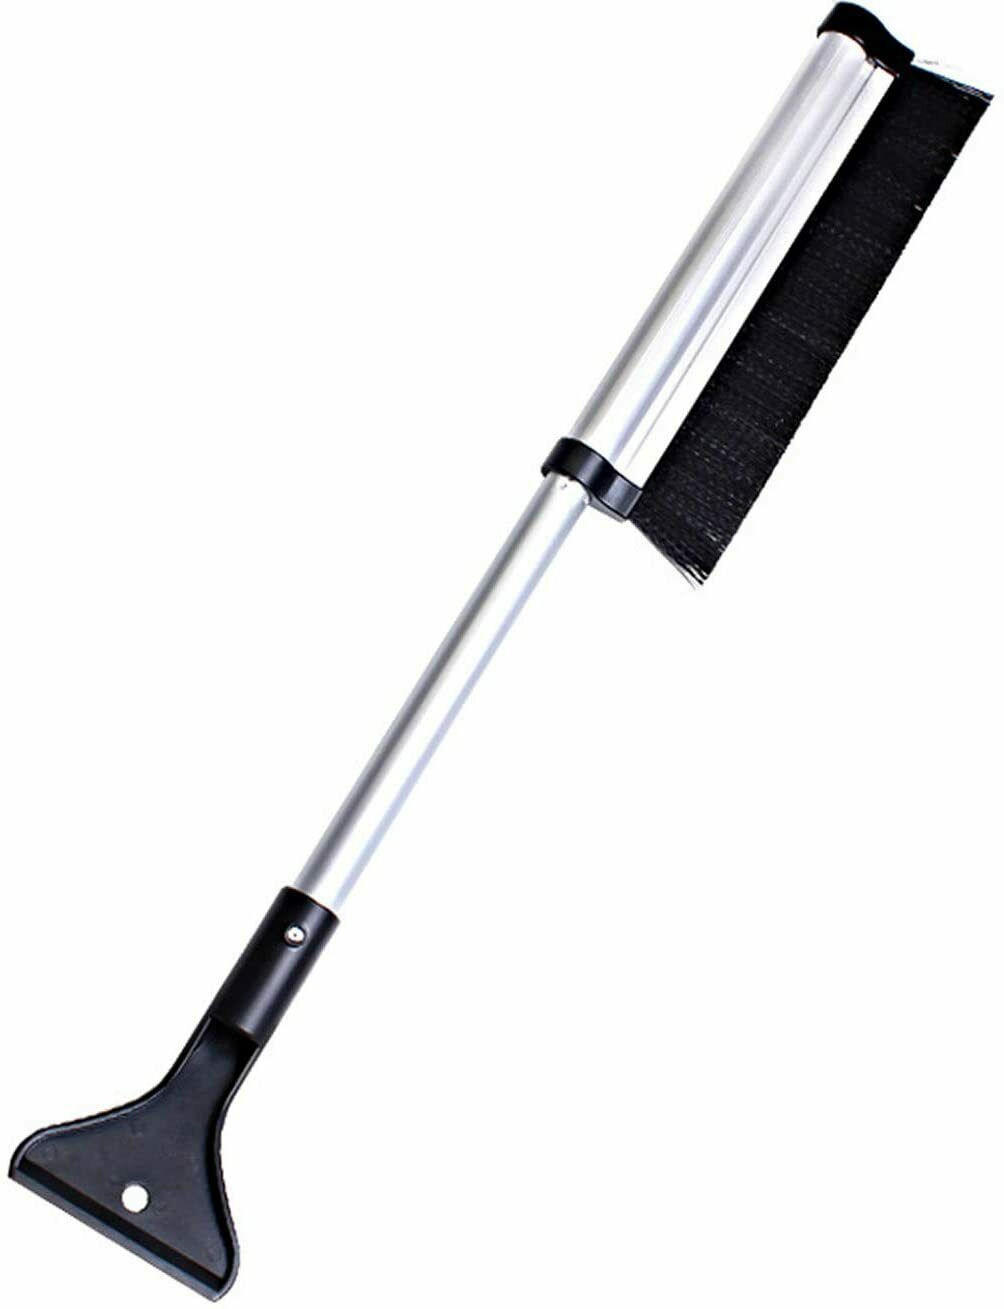 Snow Brush With Integrated Ice Scraper And Squeegee Head For Any Cars